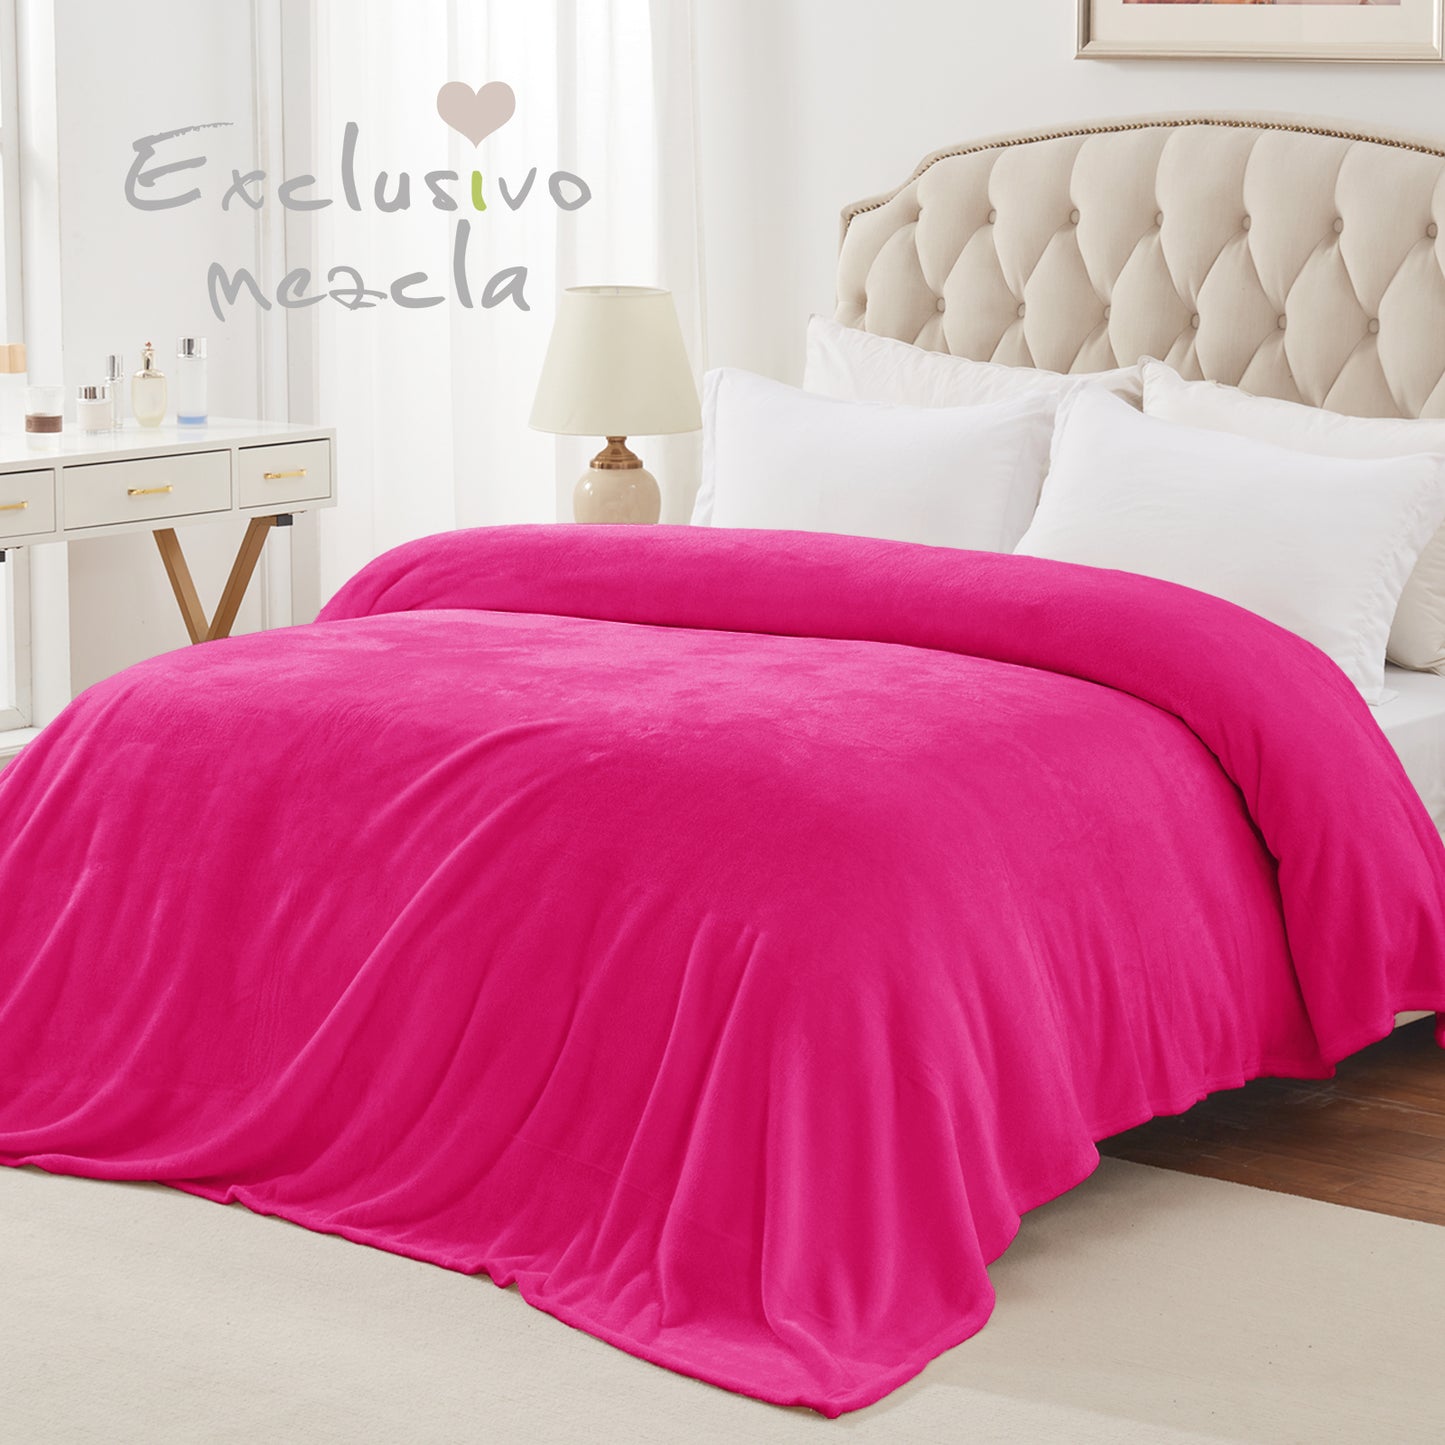 Exclusivo Mezcla Twin Size Flannel Fleece Velvet Plush Bed Blanket as Bedspread, Coverlet, Bed Cover (90x66 inches, Hot Pink) Soft, Lightweight, Warm and Cozy